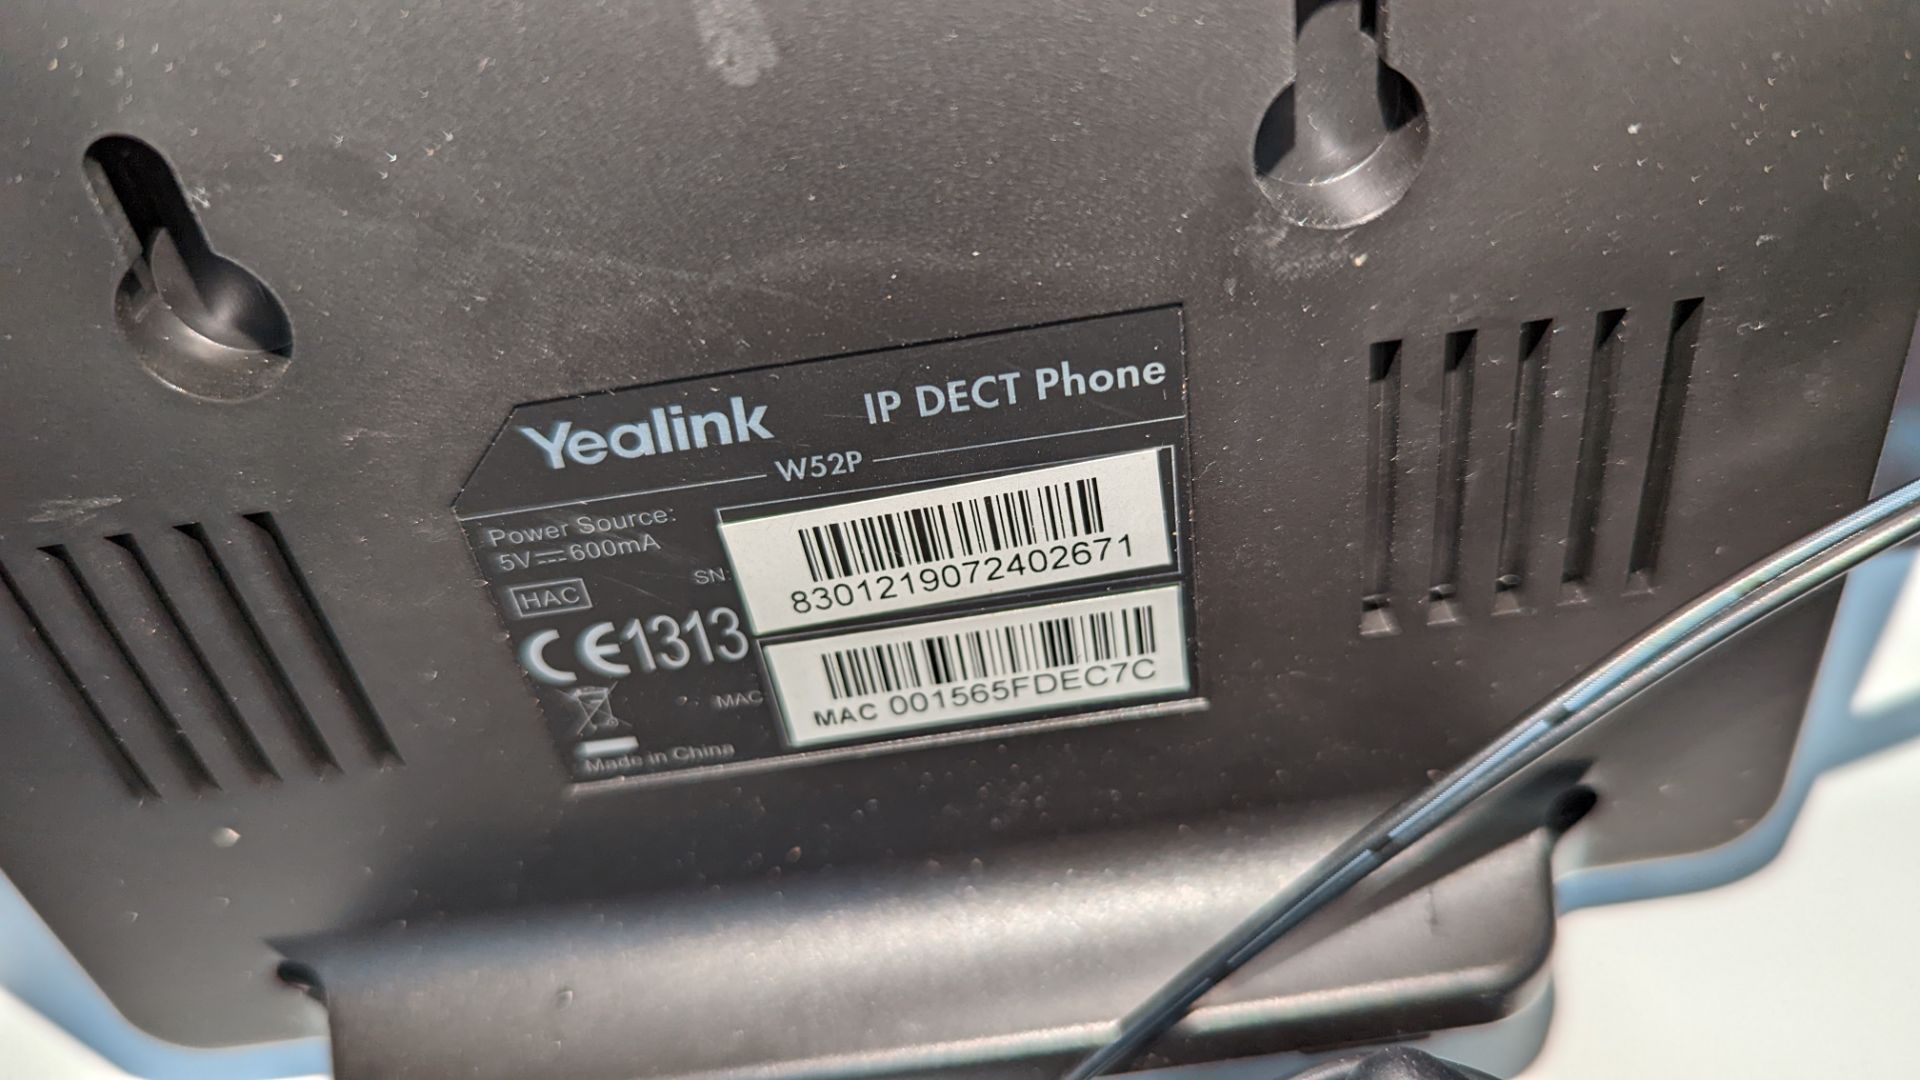 4 off Yealink model W52P wireless deck telephone handsets, each handset including a base station wit - Image 6 of 7